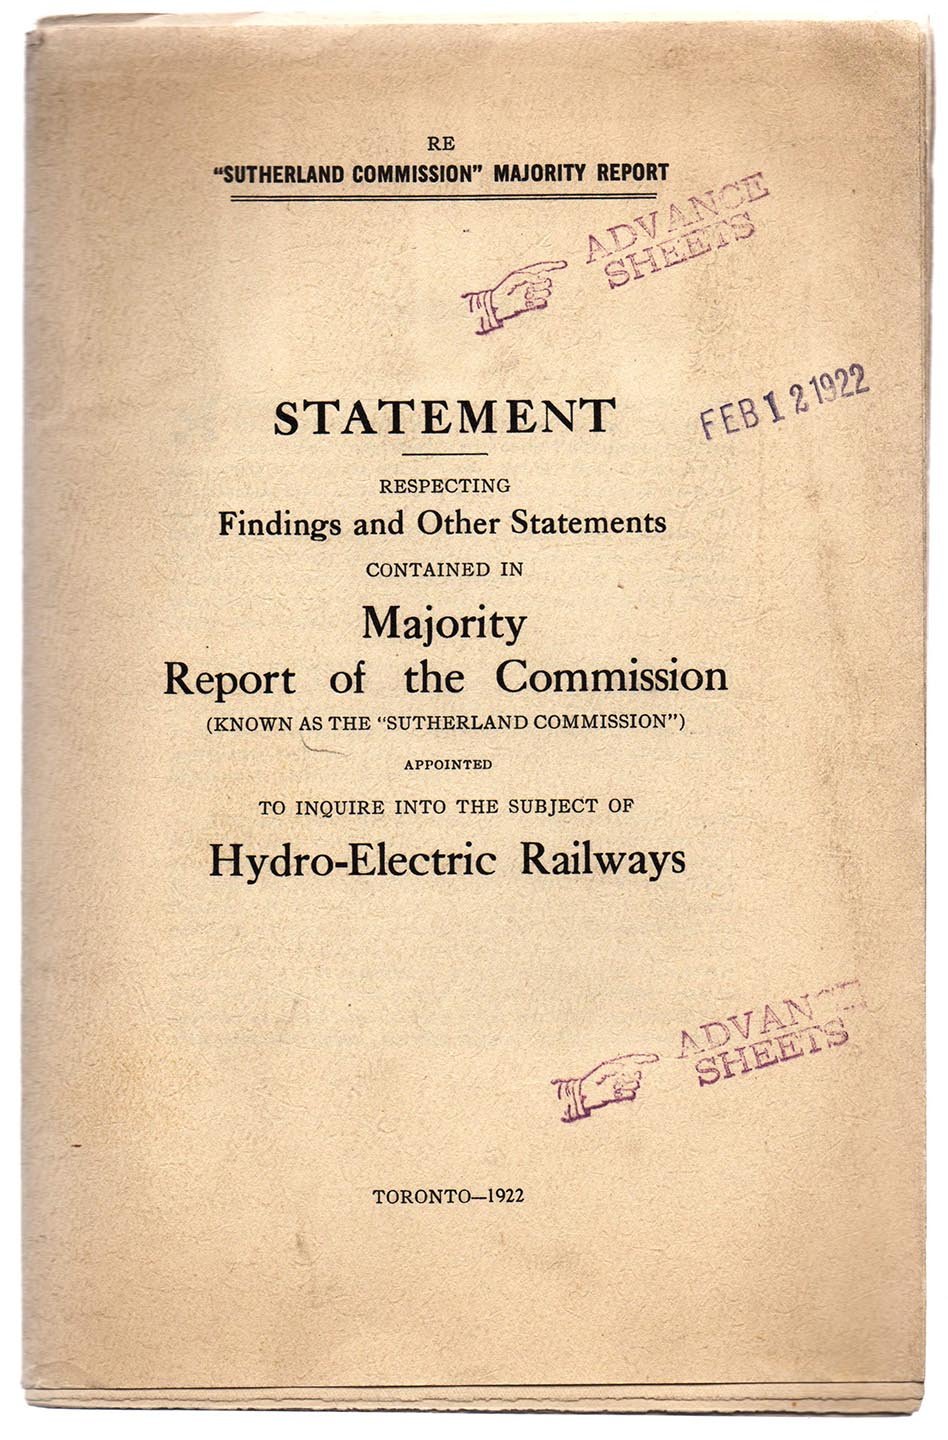 Statement Respecting Findings and Other Statements Contained in Majority Report of the Commission (Known as the "Sutherland Commission") Appointed to Inquire into the Subject of Hydro-Electric Railways